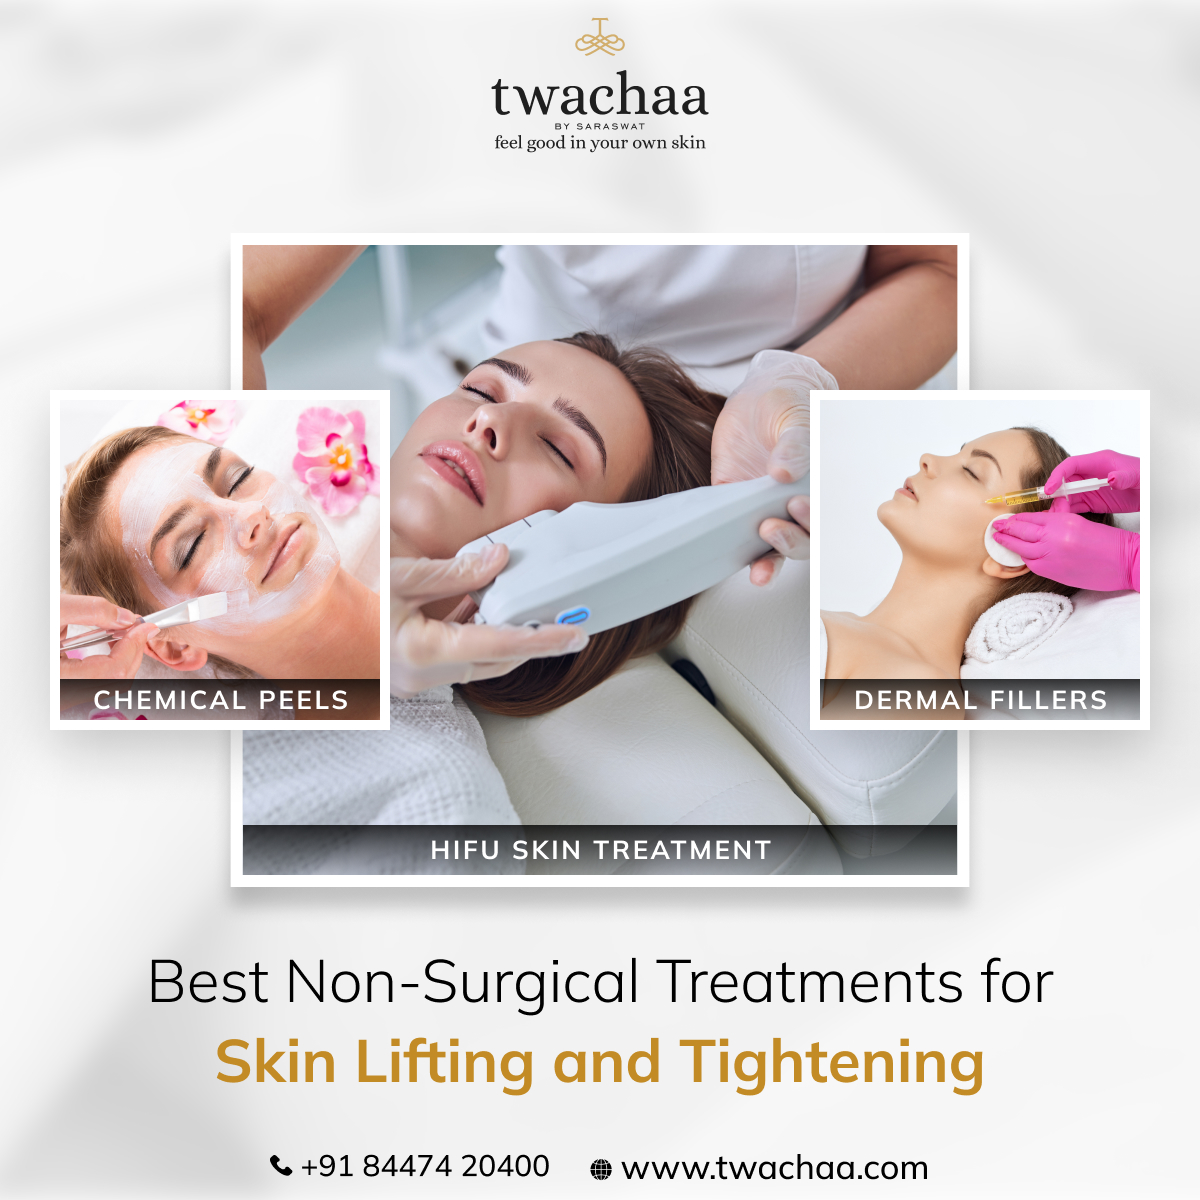 Best Non-Surgical Treatments for Skin Lifting and Tightening